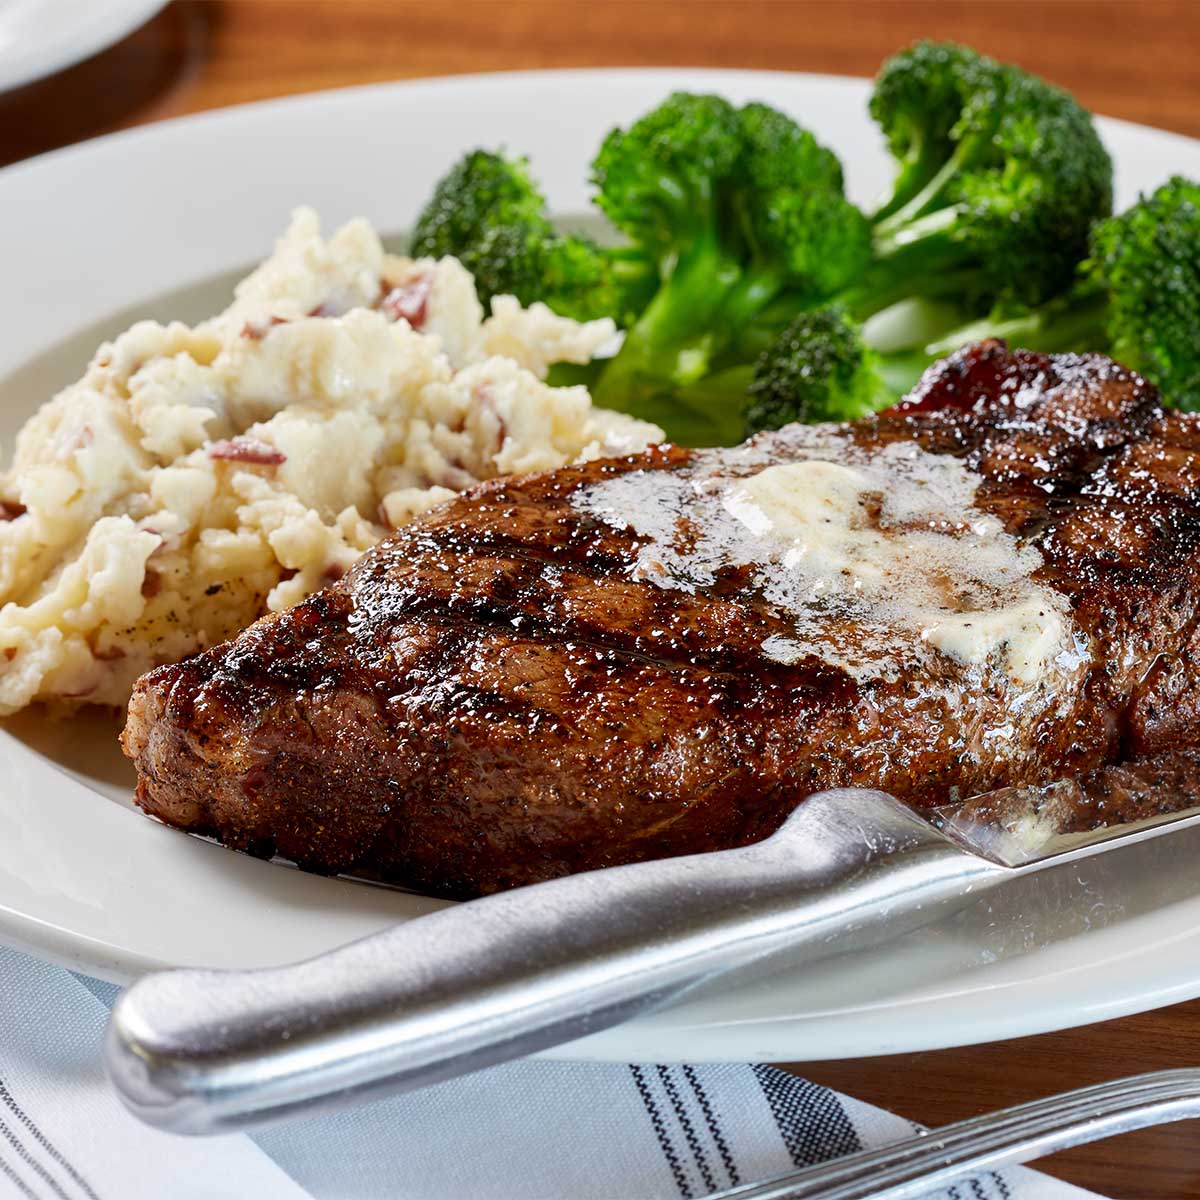 New York strip steak with mashed potatoes and broccoli at Burtons Riverdale Park location